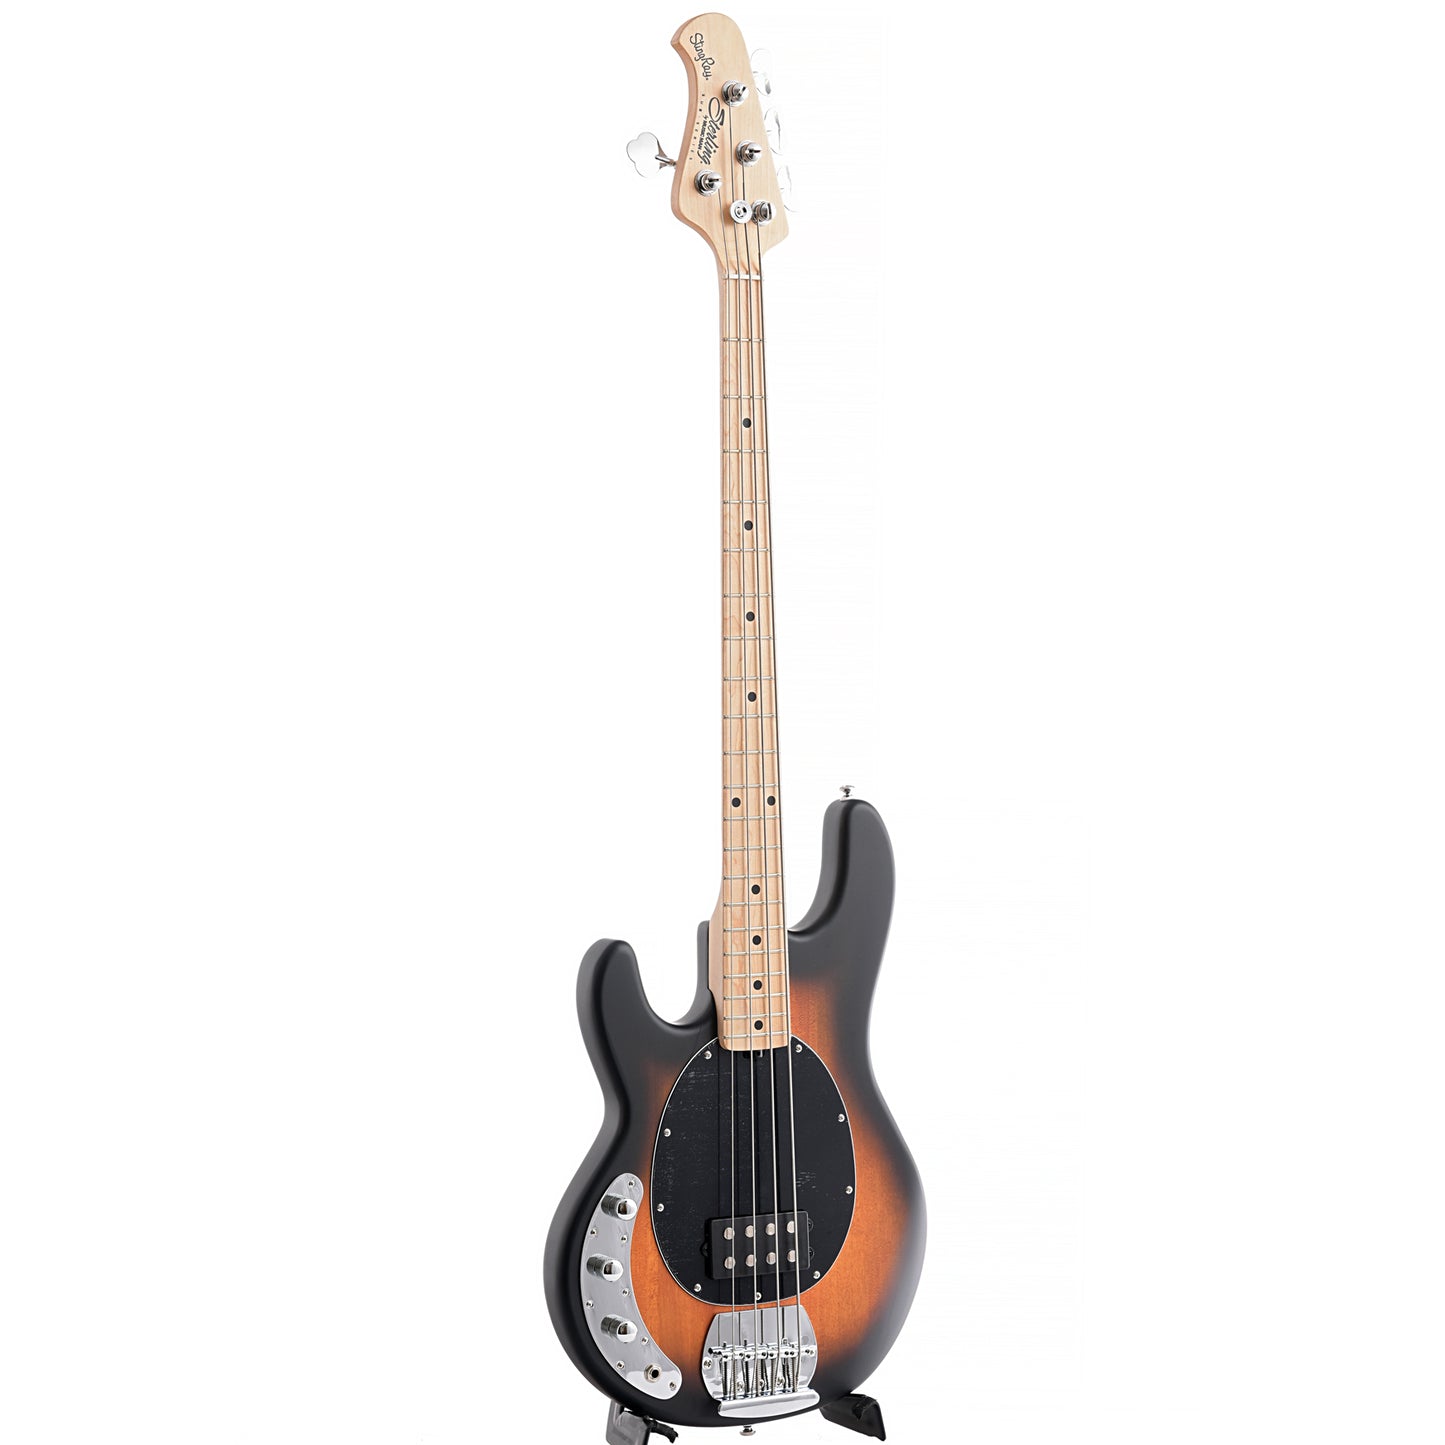 Image 1 of Sterling by Music Man 4-String Left Handed StingRay Bass, Vintage Sunburst - SKU# RAY4LH-VS : Product Type Solid Body Bass Guitars : Elderly Instruments